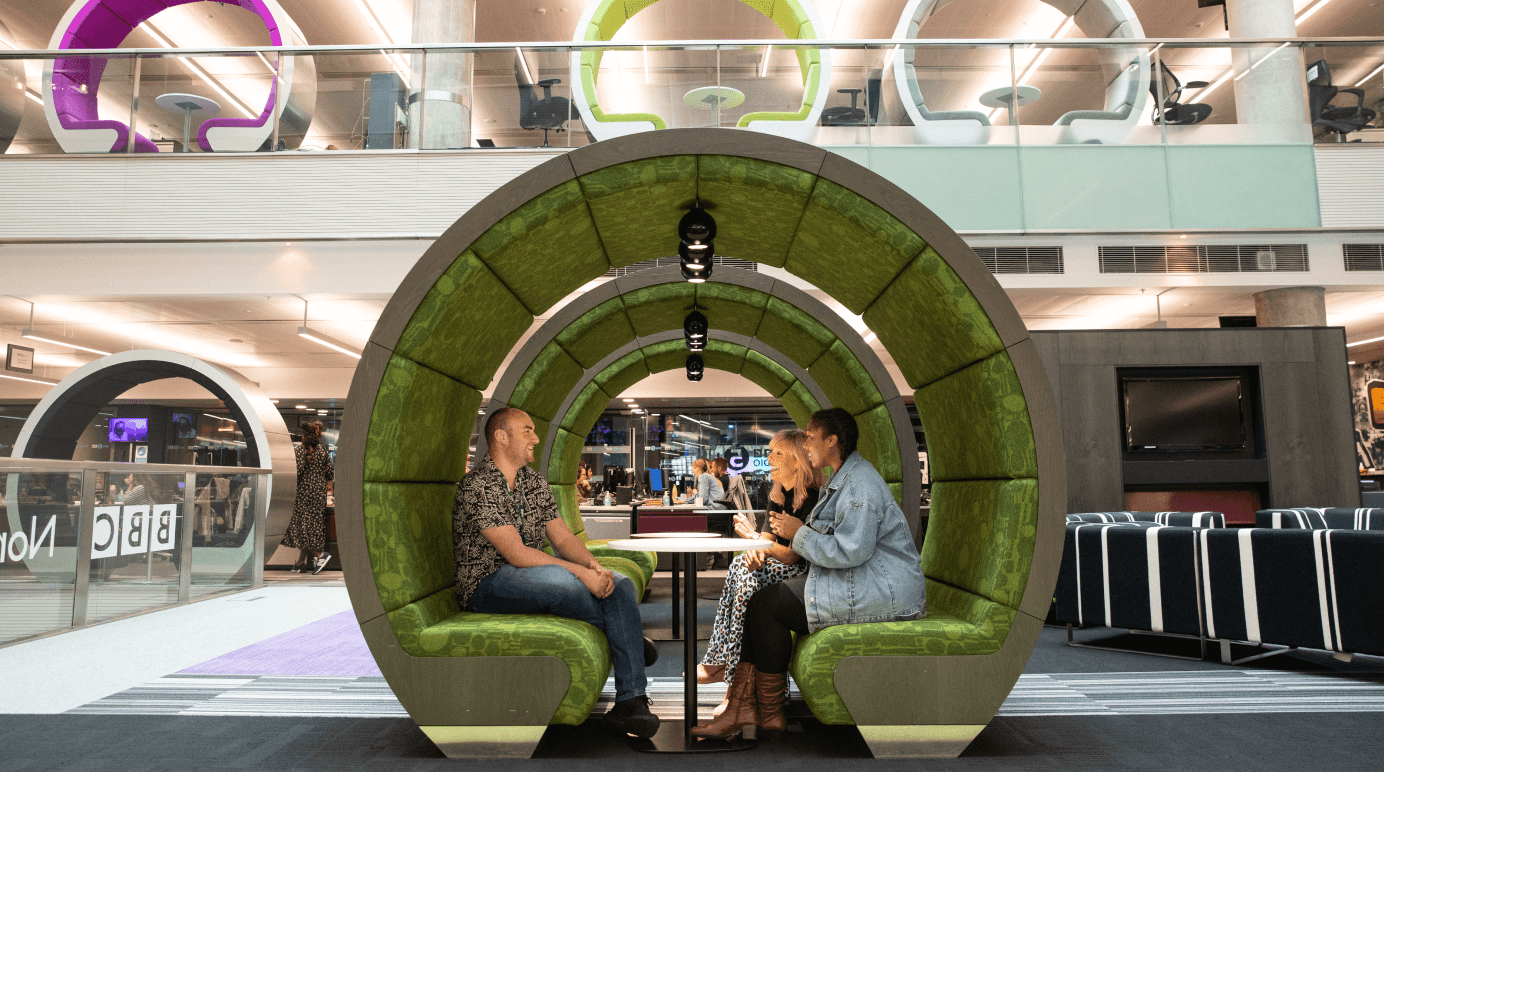 BBC employees in a meeting pod